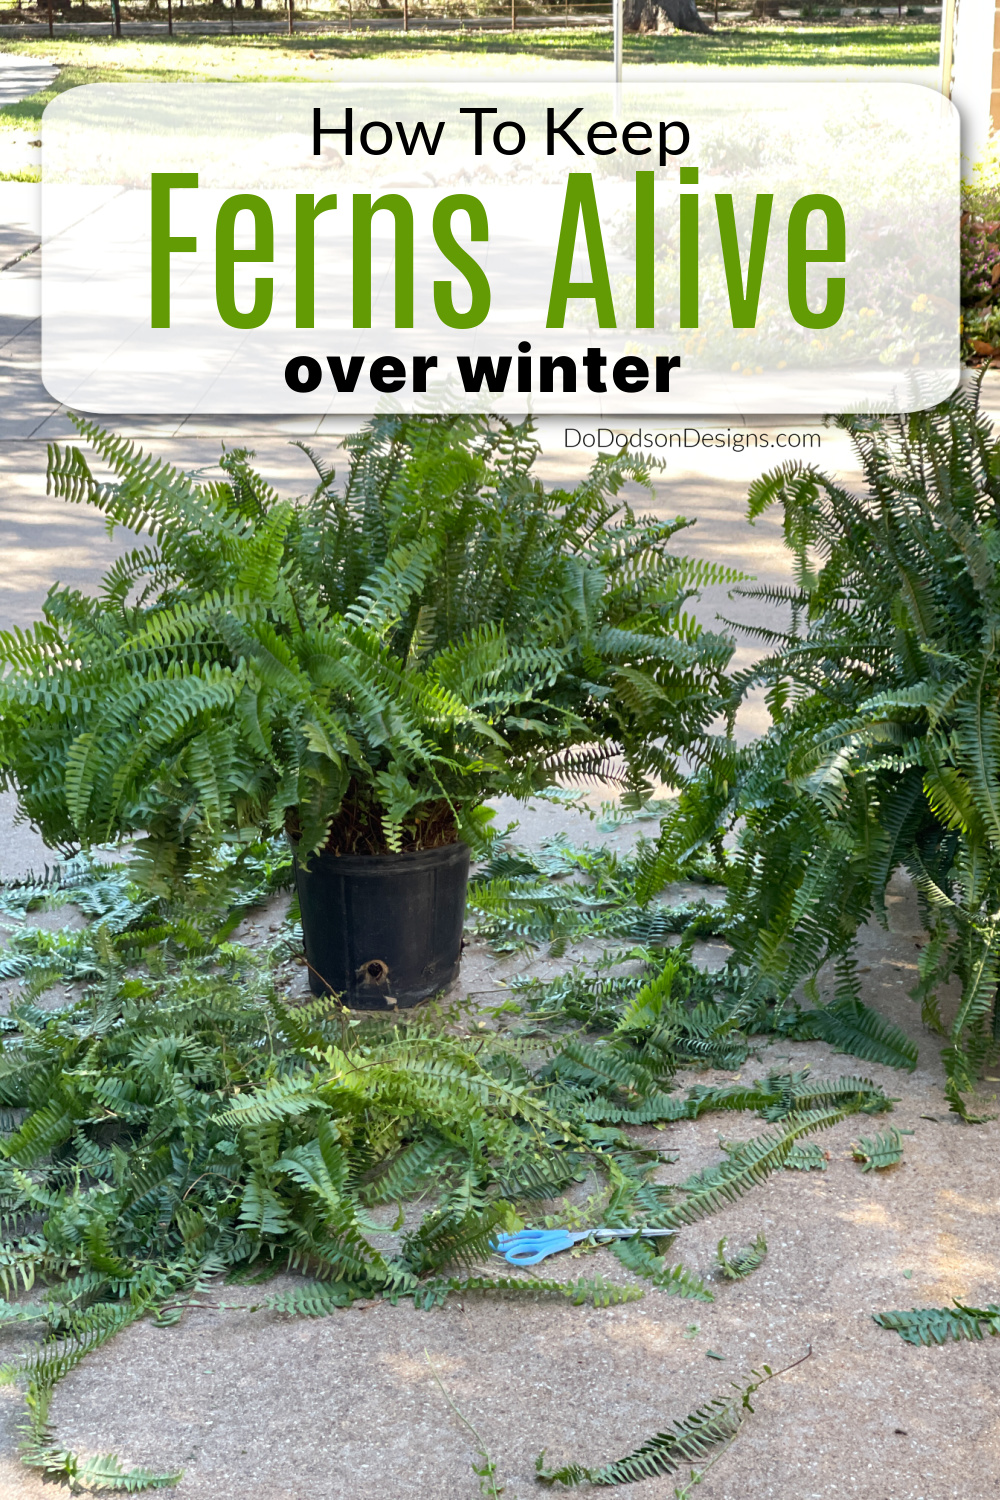 Things You Should Know To Keep Ferns Alive in Winter Months